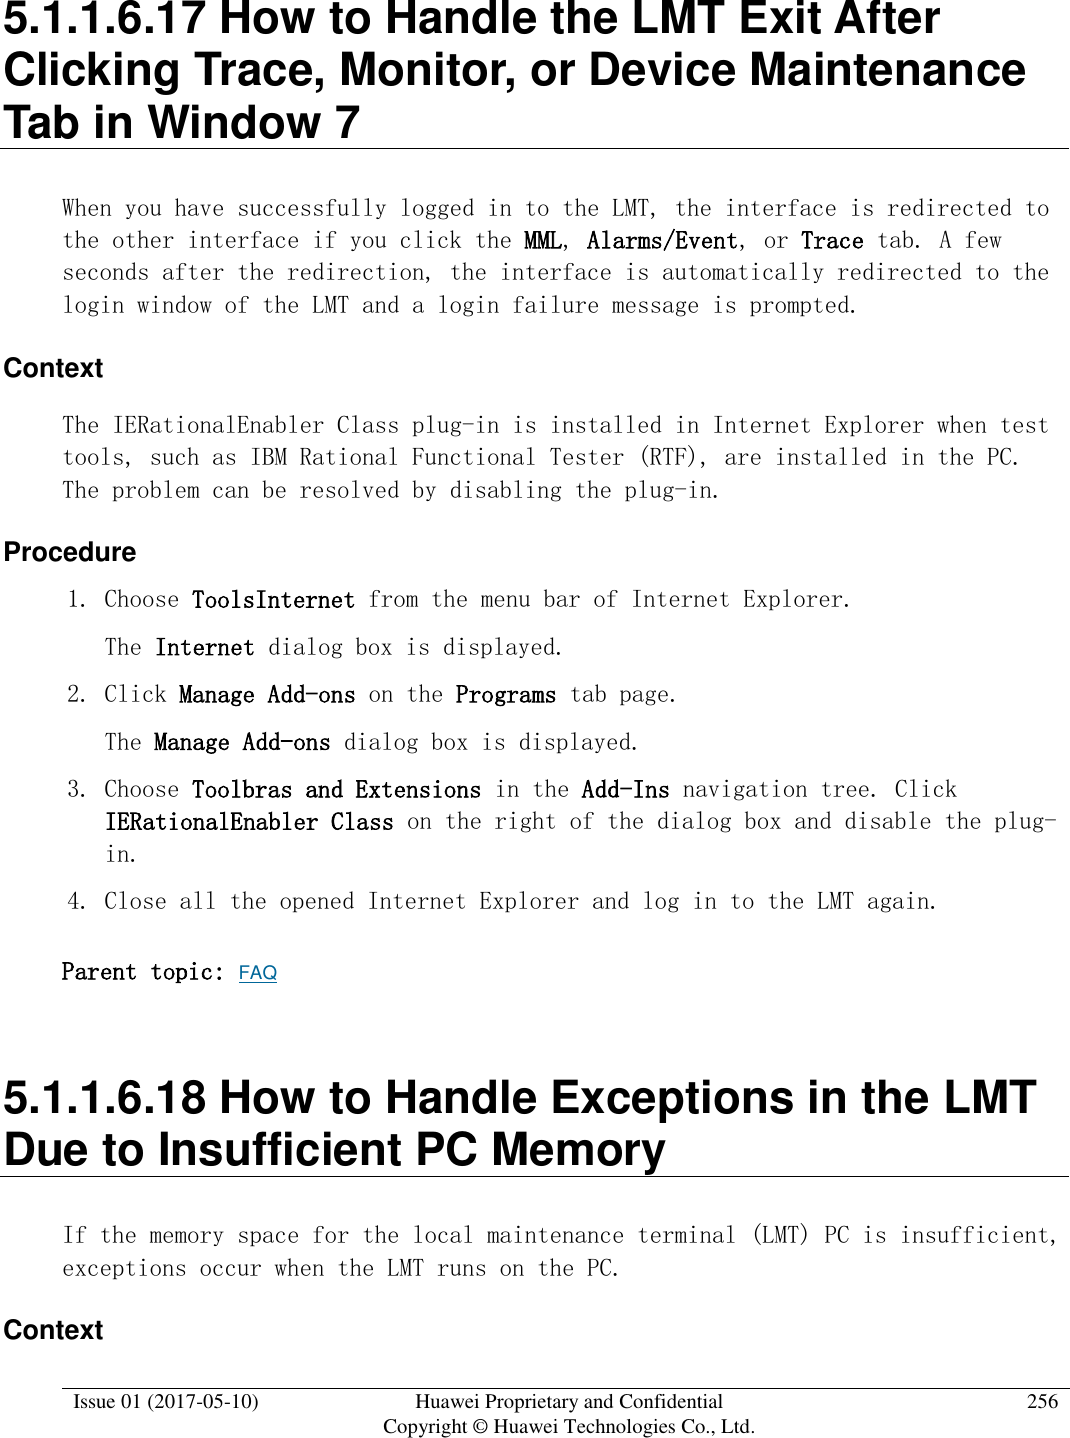  Issue 01 (2017-05-10) Huawei Proprietary and Confidential      Copyright © Huawei Technologies Co., Ltd. 256  5.1.1.6.17 How to Handle the LMT Exit After Clicking Trace, Monitor, or Device Maintenance Tab in Window 7 When you have successfully logged in to the LMT, the interface is redirected to the other interface if you click the MML, Alarms/Event, or Trace tab. A few seconds after the redirection, the interface is automatically redirected to the login window of the LMT and a login failure message is prompted. Context The IERationalEnabler Class plug-in is installed in Internet Explorer when test tools, such as IBM Rational Functional Tester (RTF), are installed in the PC. The problem can be resolved by disabling the plug-in. Procedure 1. Choose ToolsInternet from the menu bar of Internet Explorer.  The Internet dialog box is displayed. 2. Click Manage Add-ons on the Programs tab page.  The Manage Add-ons dialog box is displayed. 3. Choose Toolbras and Extensions in the Add-Ins navigation tree. Click IERationalEnabler Class on the right of the dialog box and disable the plug-in. 4. Close all the opened Internet Explorer and log in to the LMT again. Parent topic: FAQ 5.1.1.6.18 How to Handle Exceptions in the LMT Due to Insufficient PC Memory If the memory space for the local maintenance terminal (LMT) PC is insufficient, exceptions occur when the LMT runs on the PC. Context 